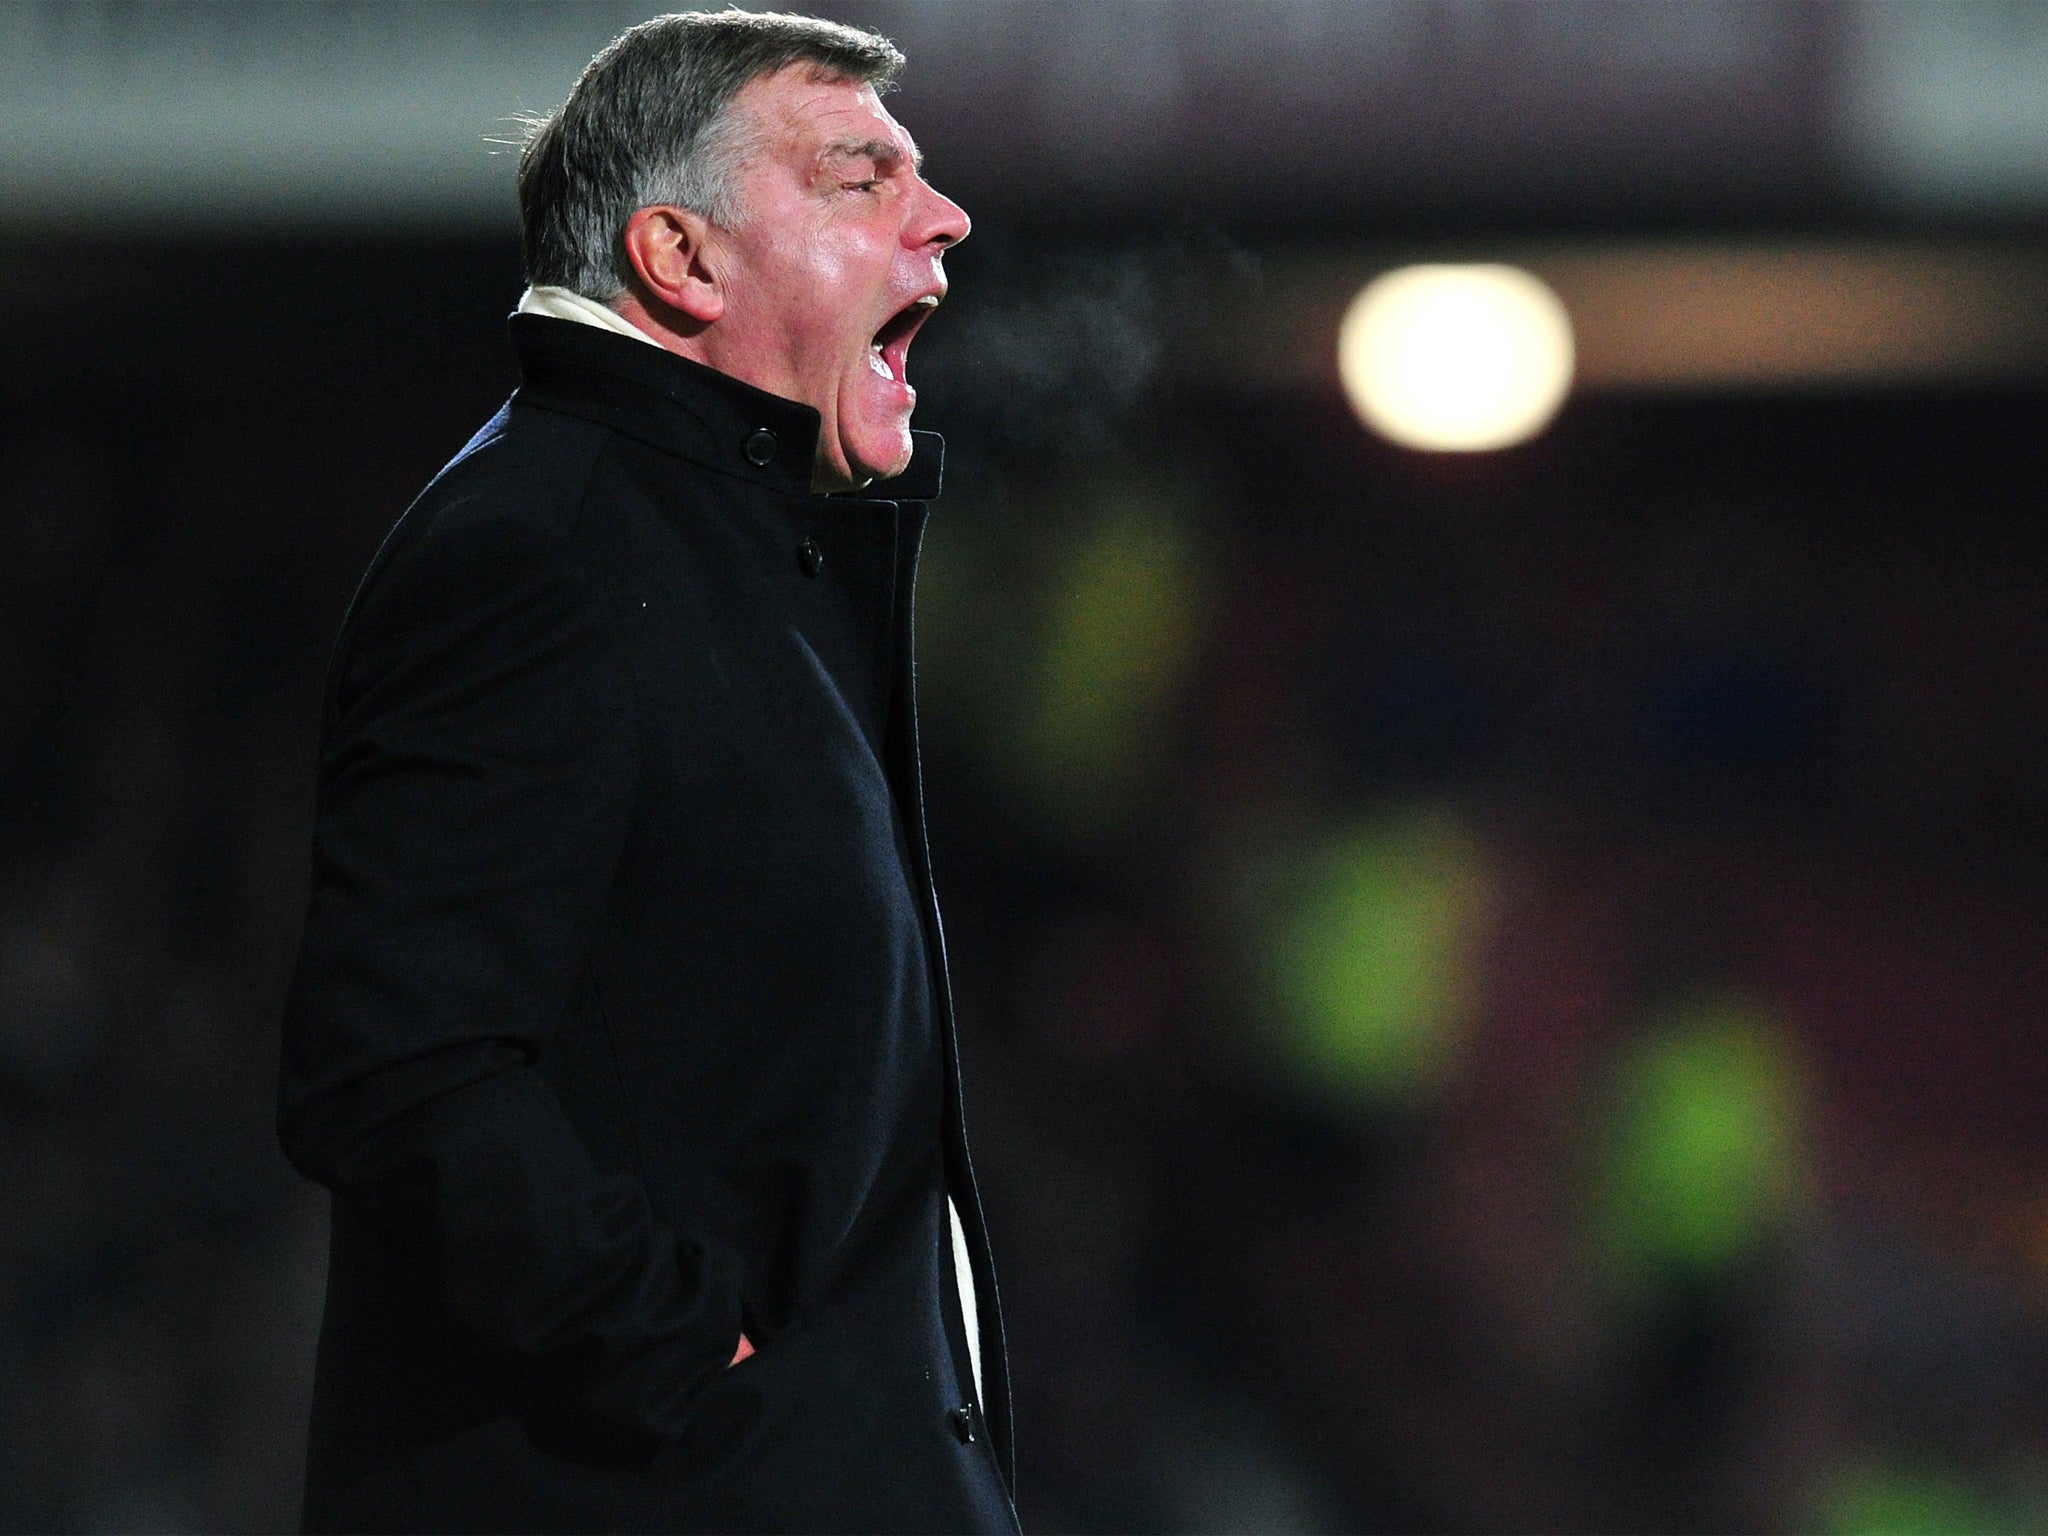 West Ham manager Sam Allardyce didn't stop shouting instructions despite the impossible task his men were facing